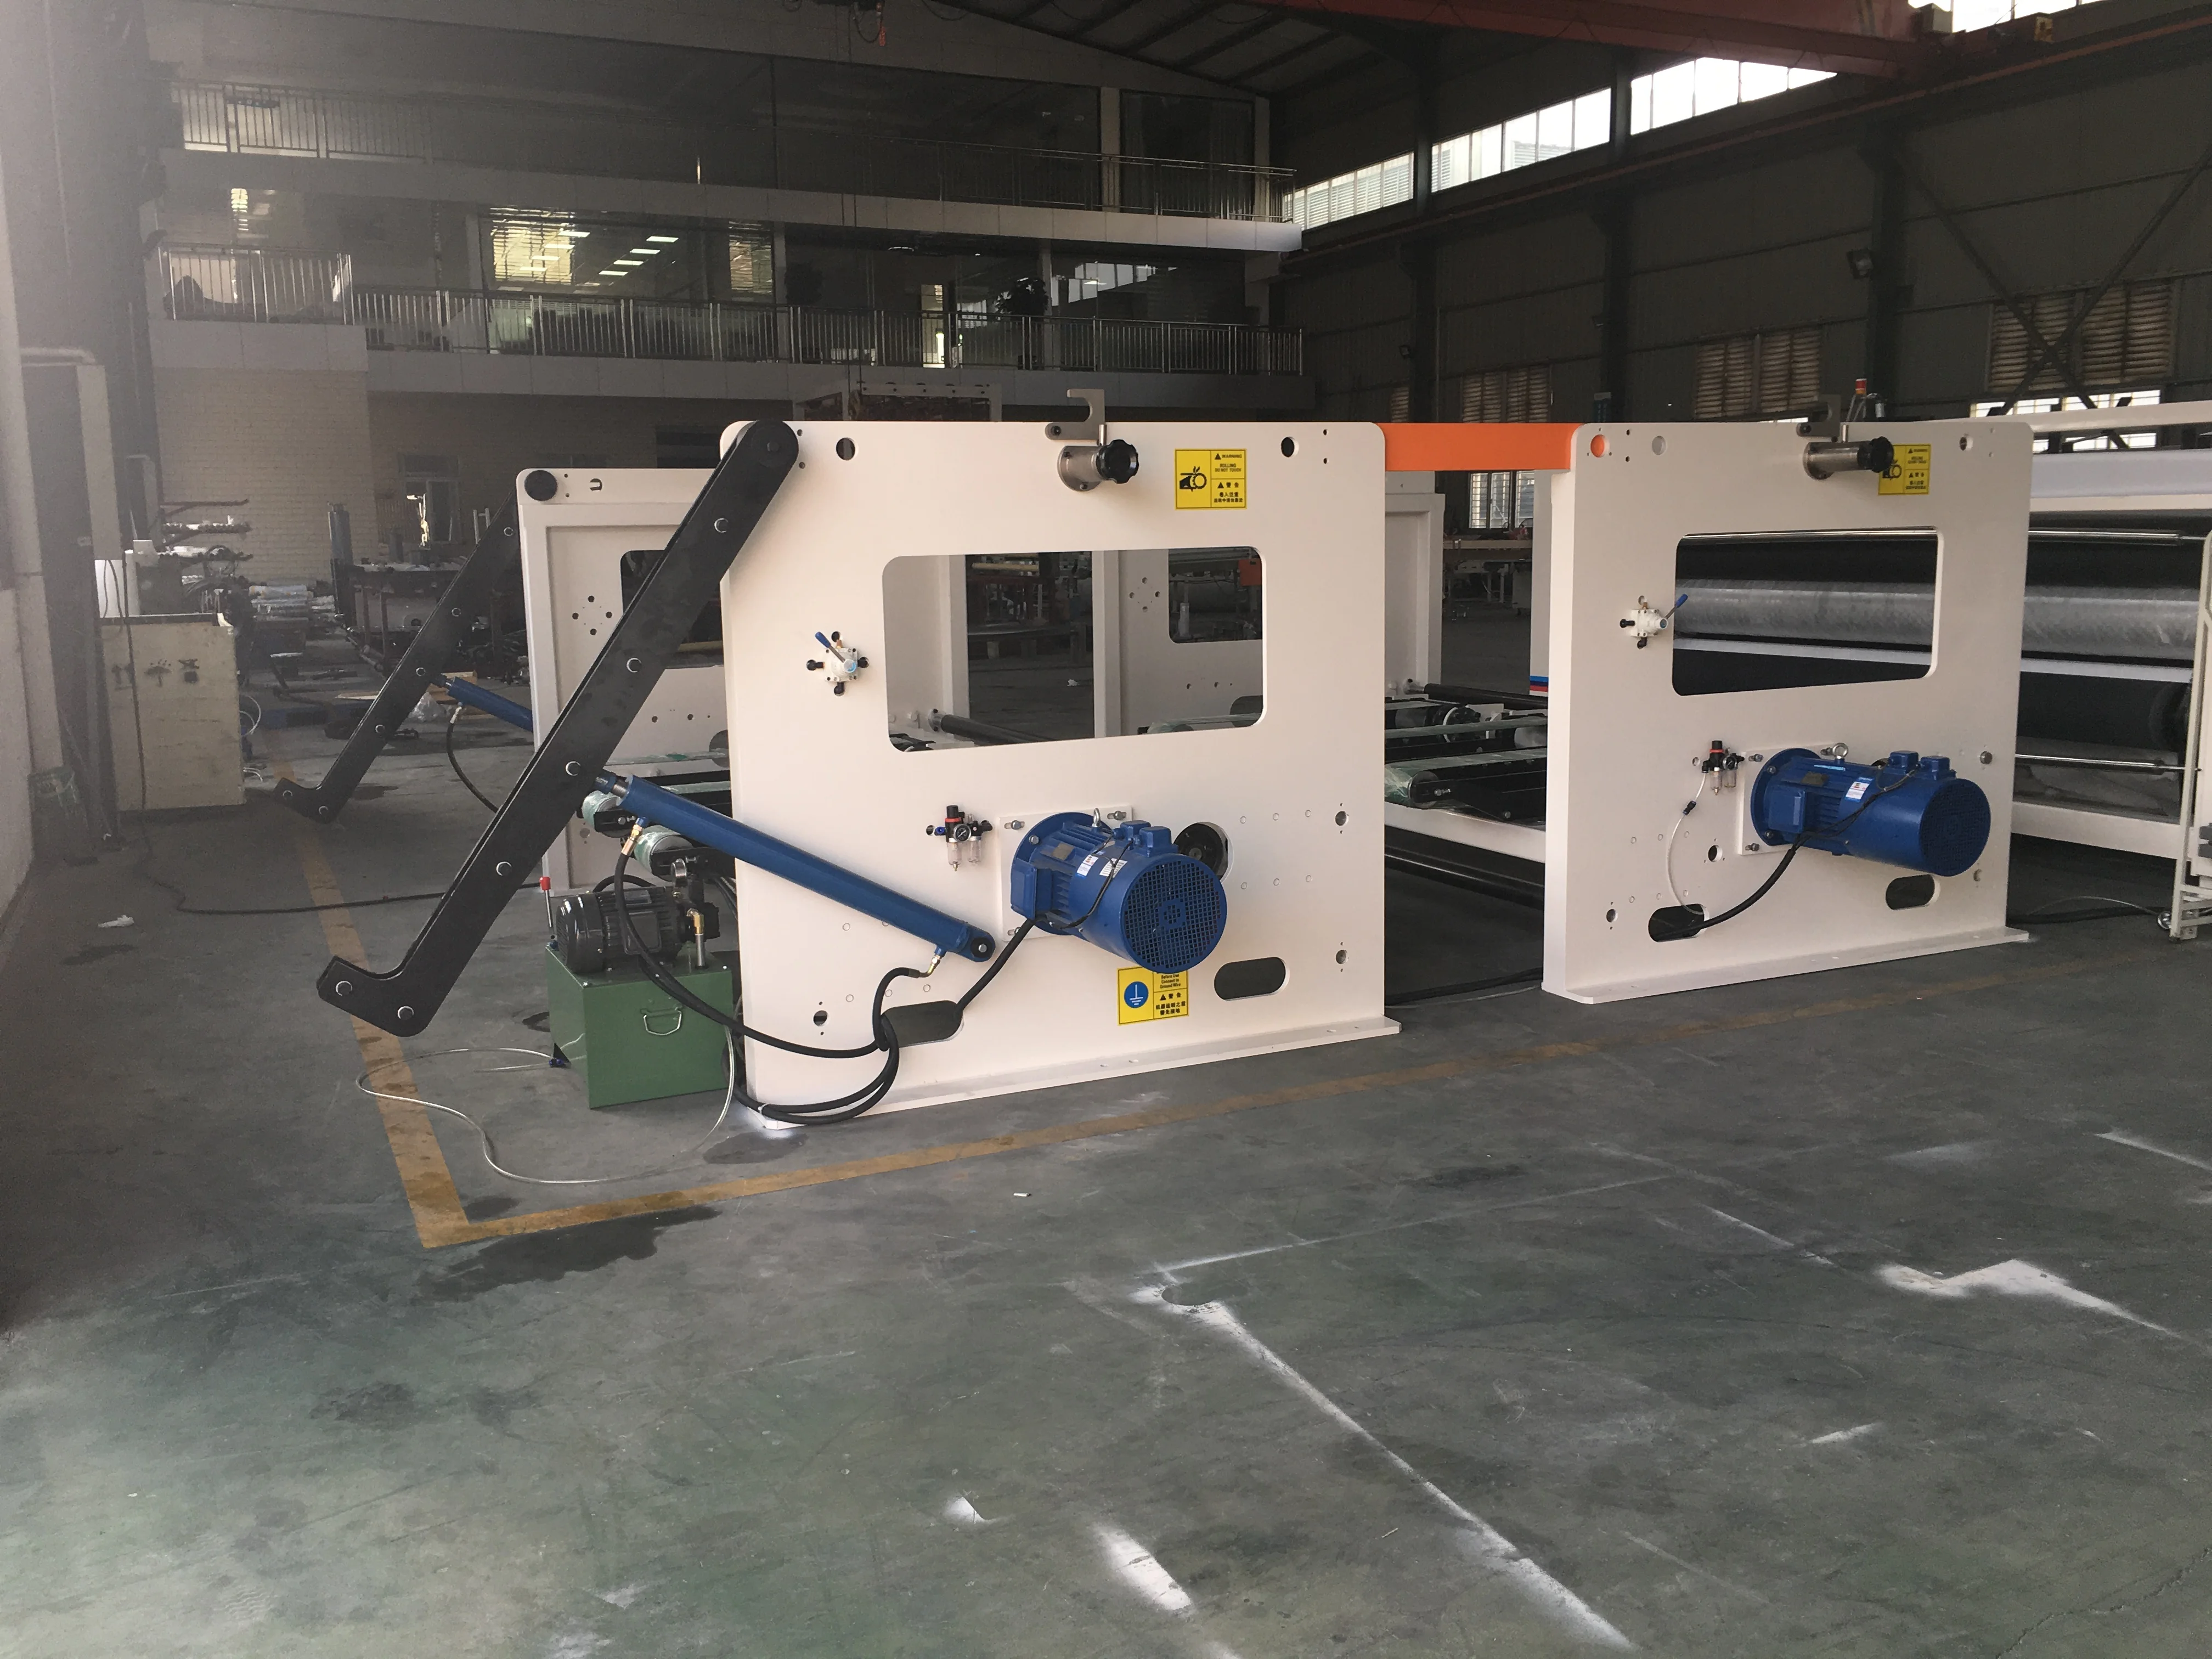 High production maxi roll and small toilet paper rewinding machine